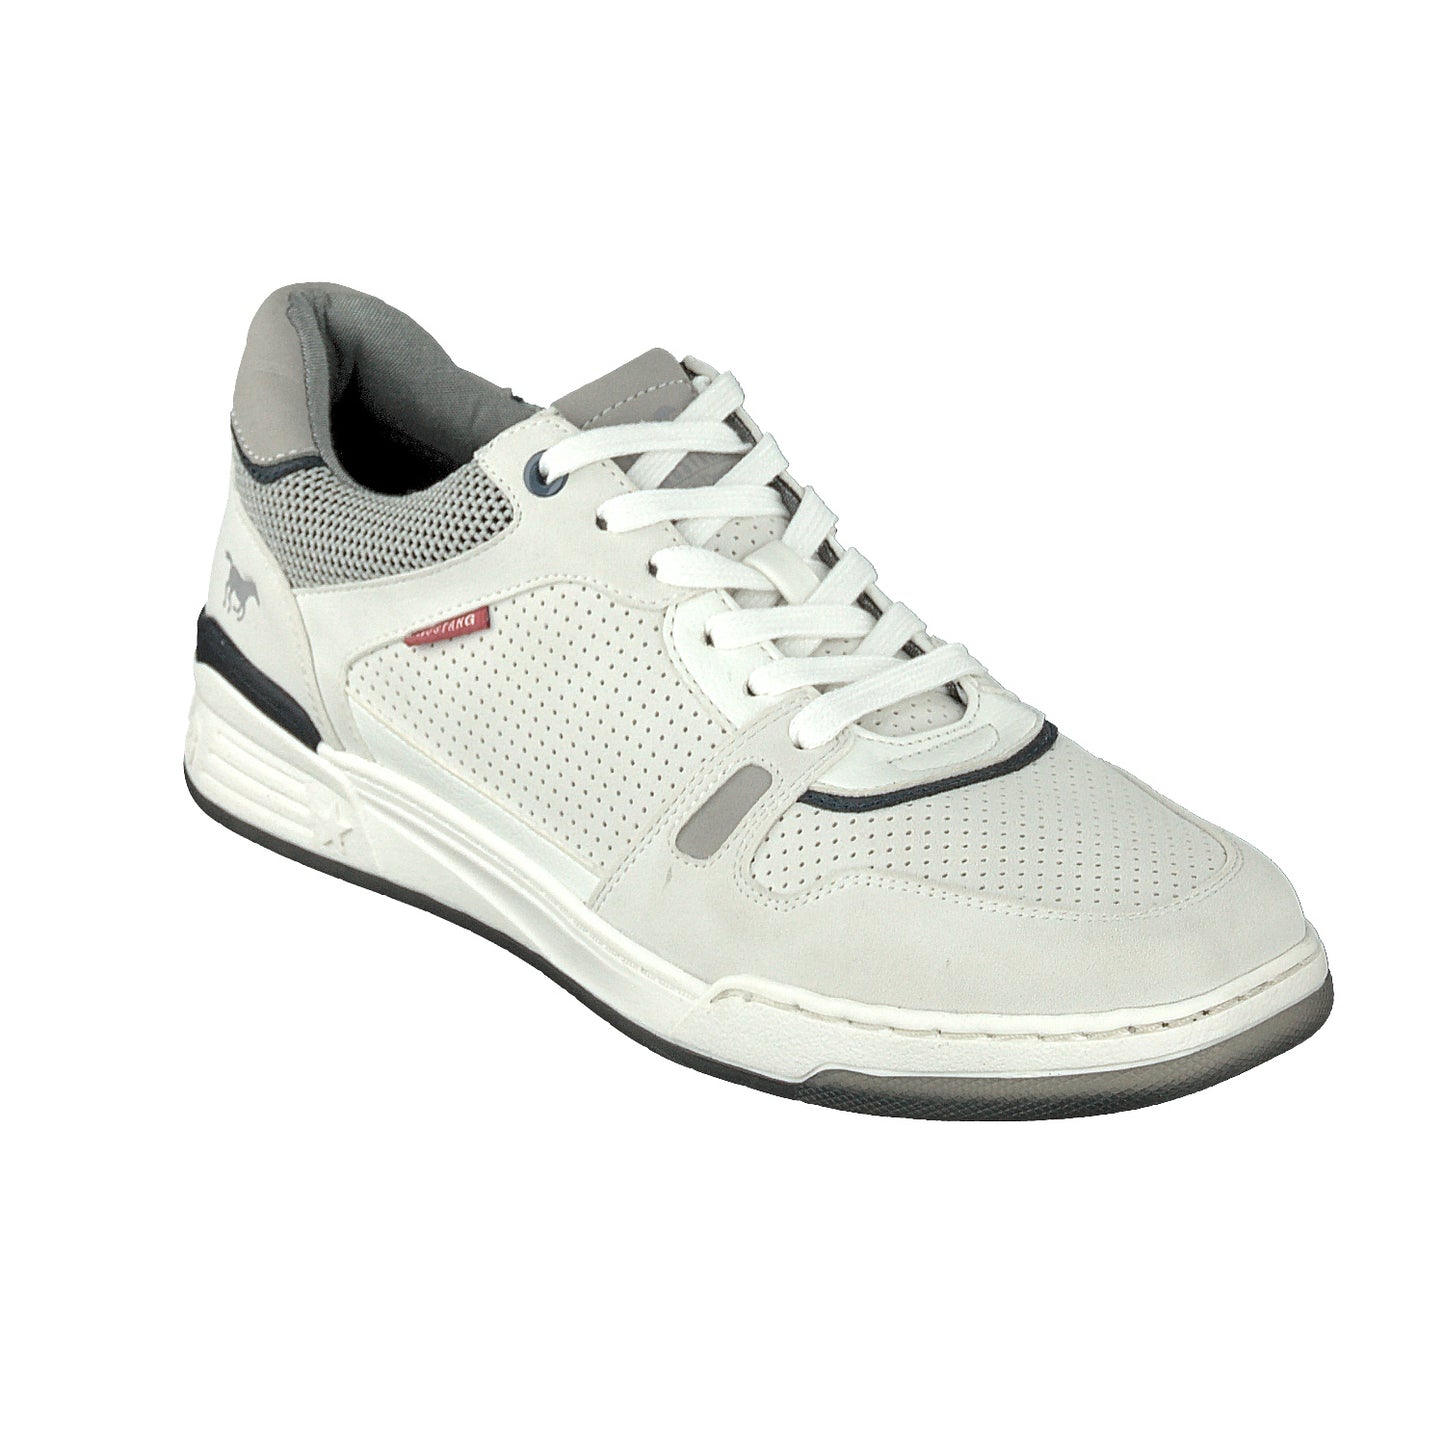 Mustang 4166-301-203 Ice White Lace Sneakers with Perforated Detailing